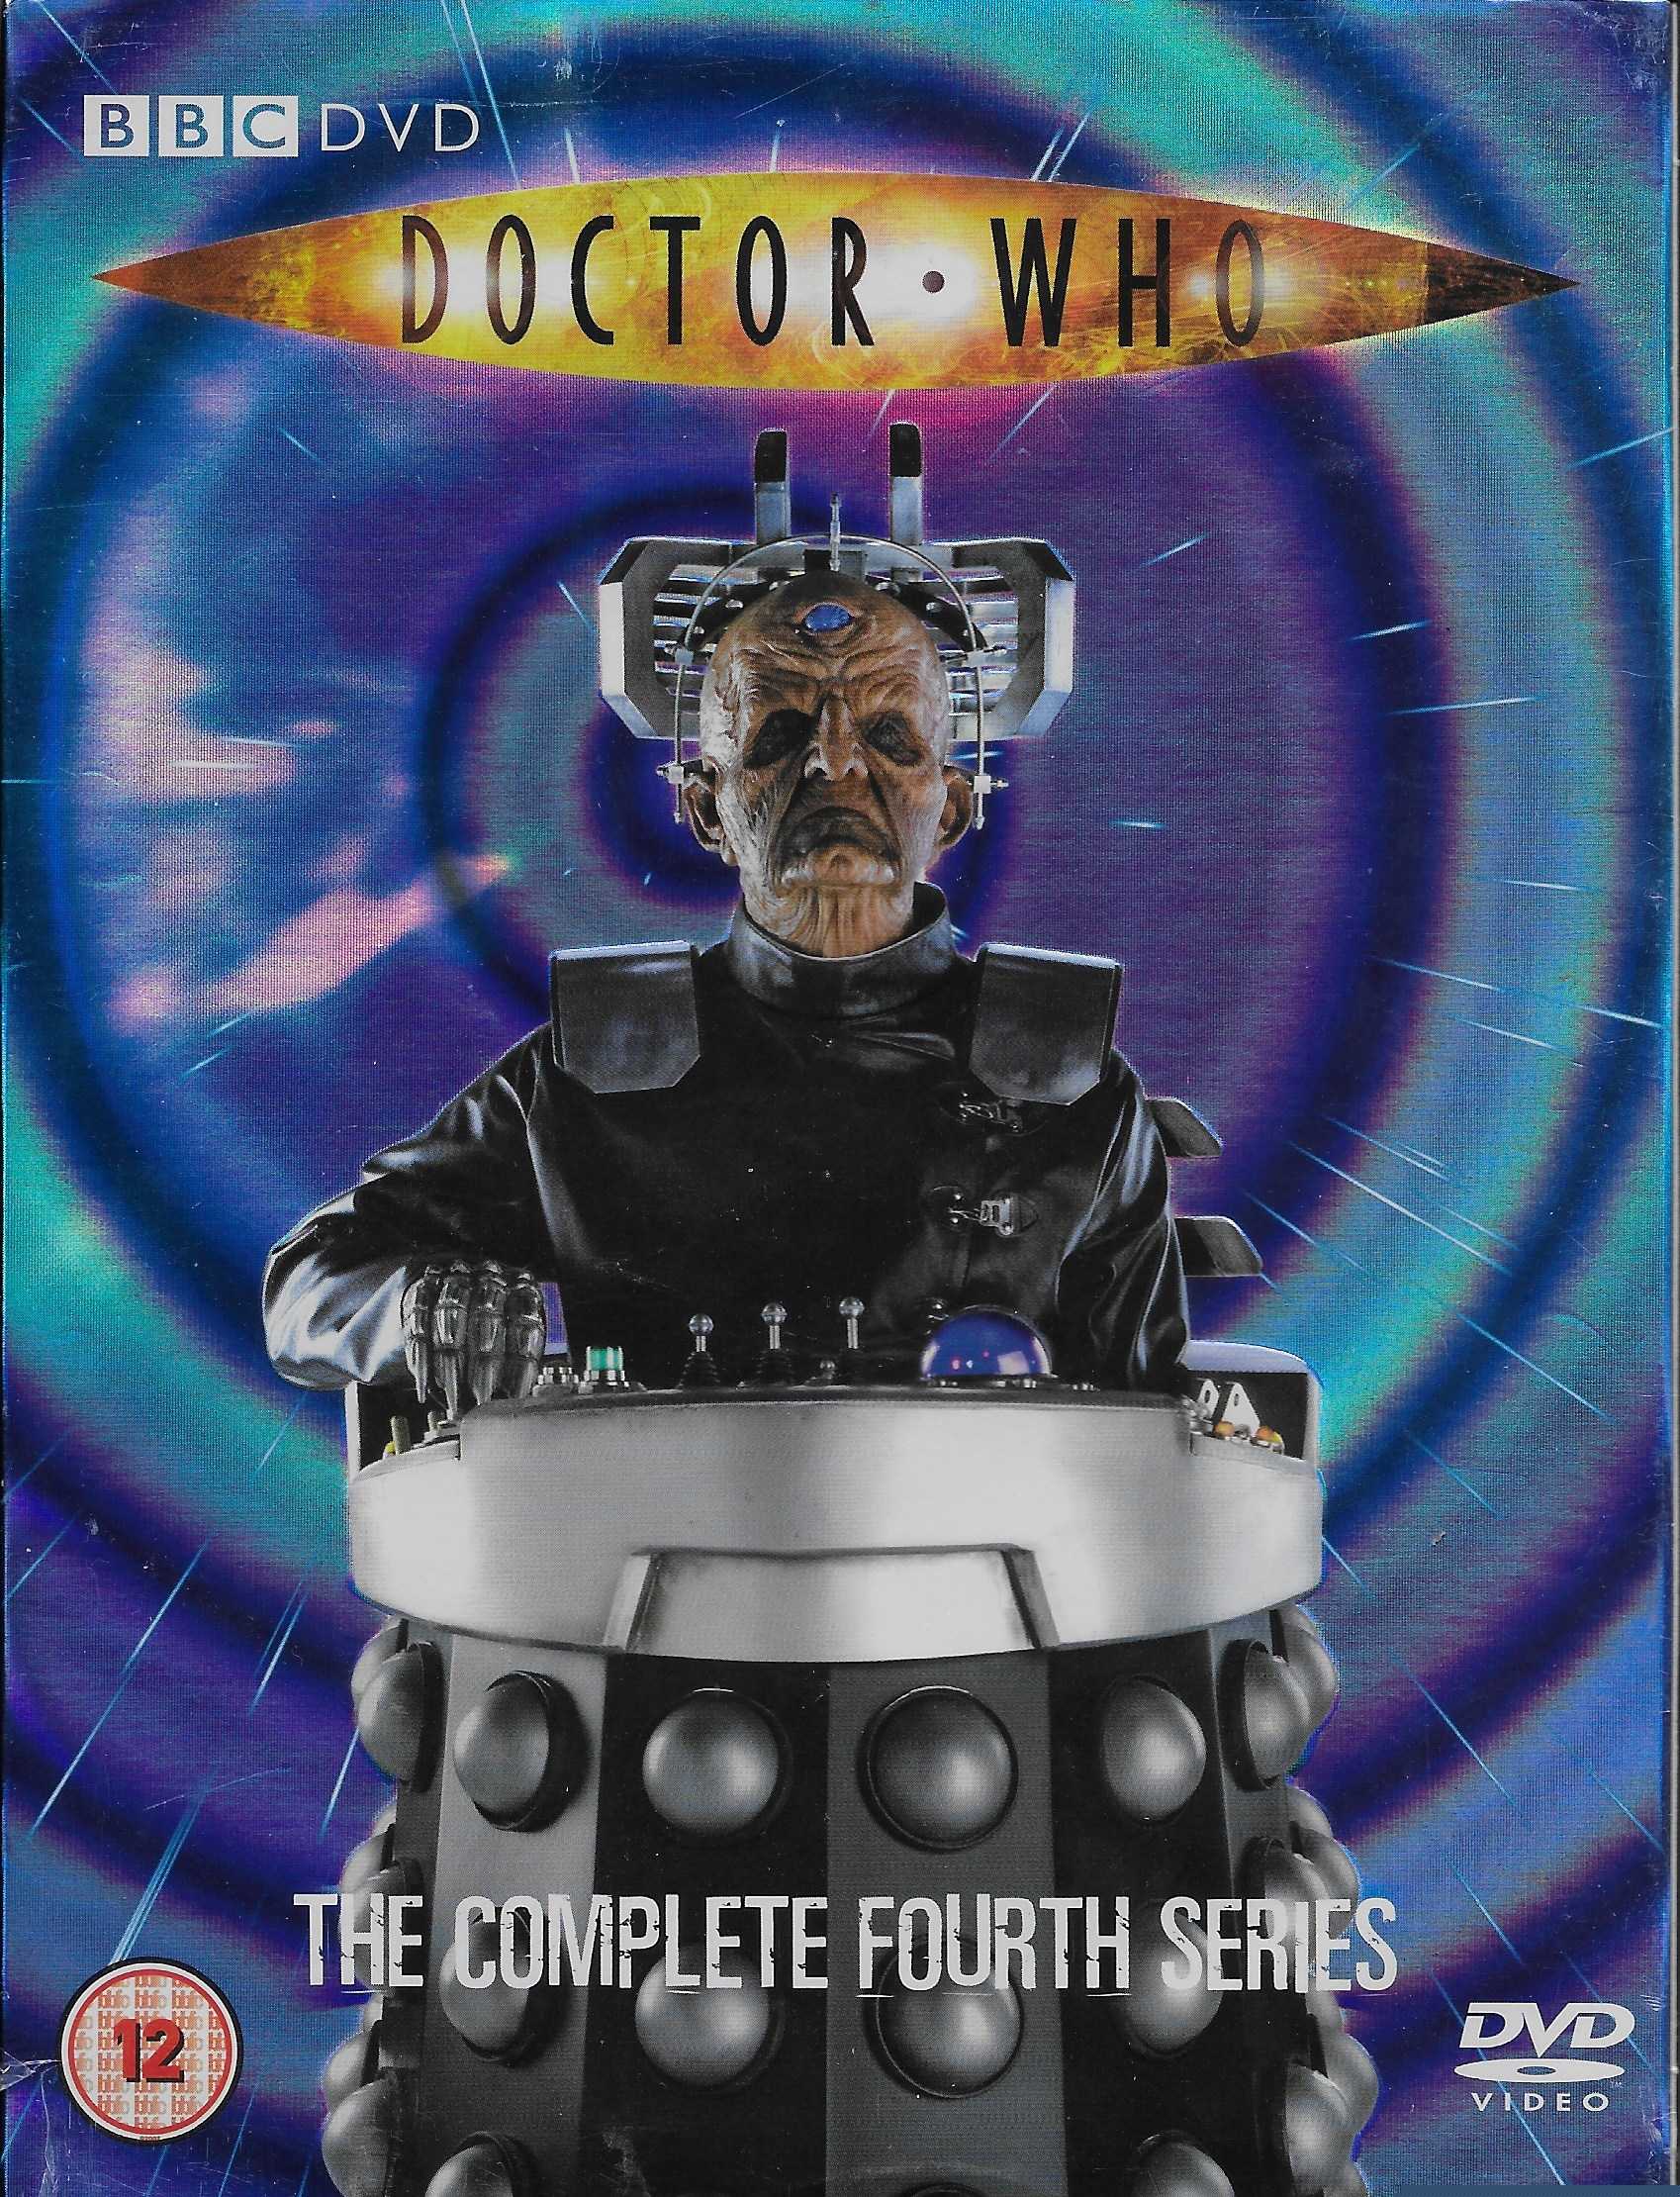 Picture of BBCDVD 2609 Doctor Who - Series 4 by artist Various from the BBC records and Tapes library